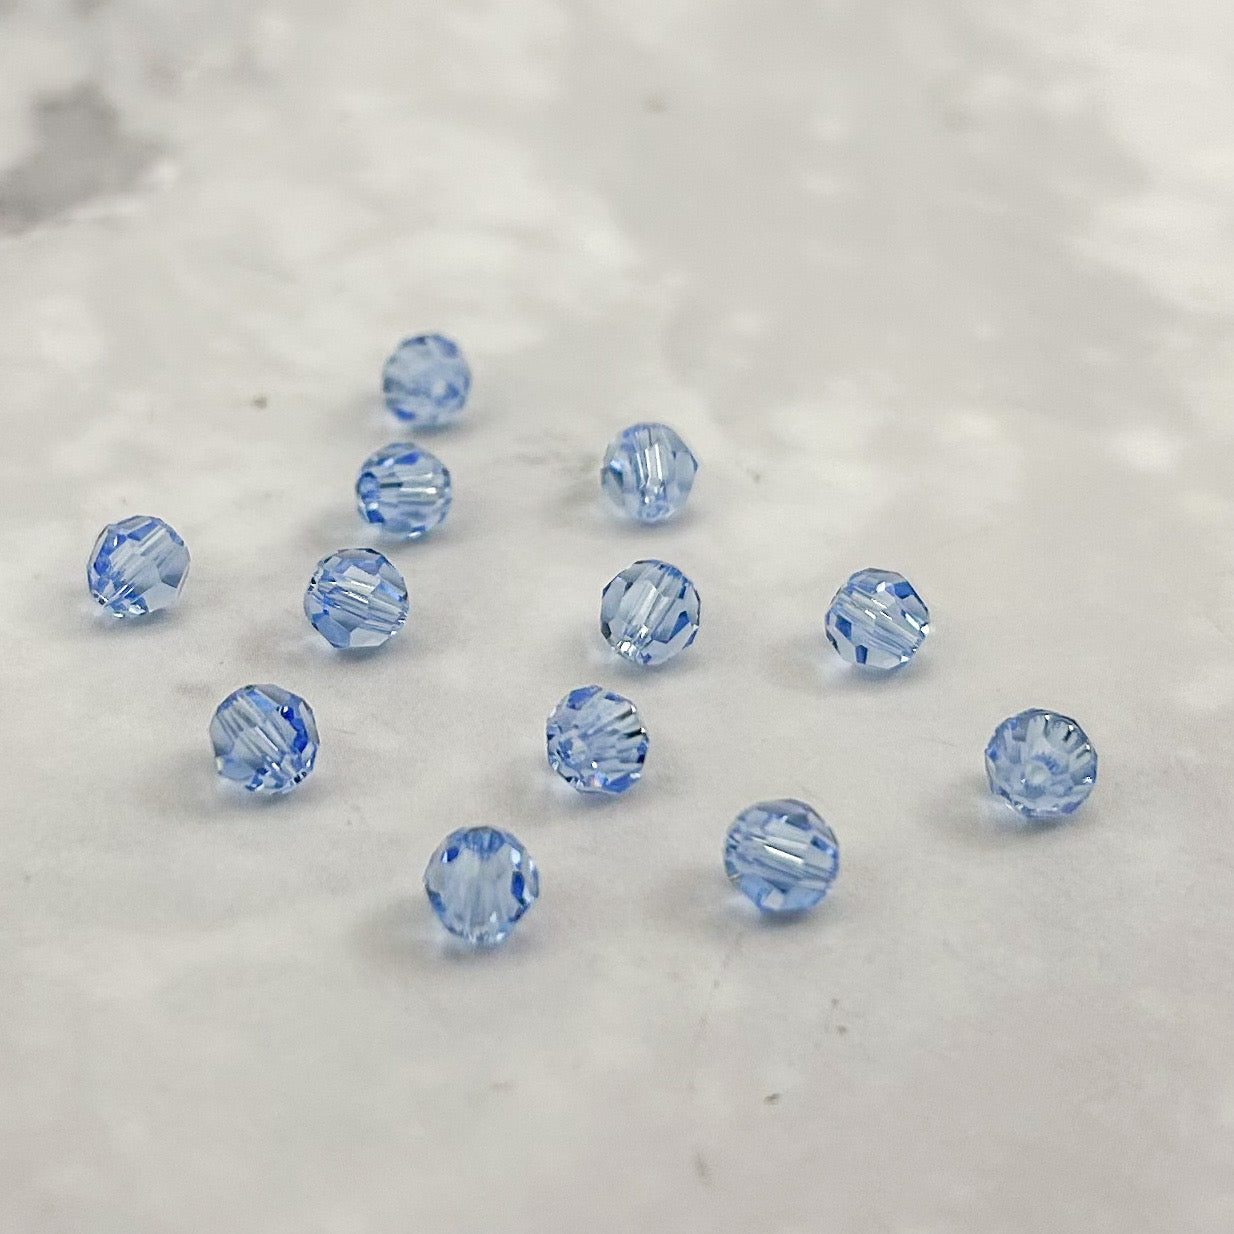 4mm Swarovski Sapphire Faceted Blue Bead Pack (12 Beads)